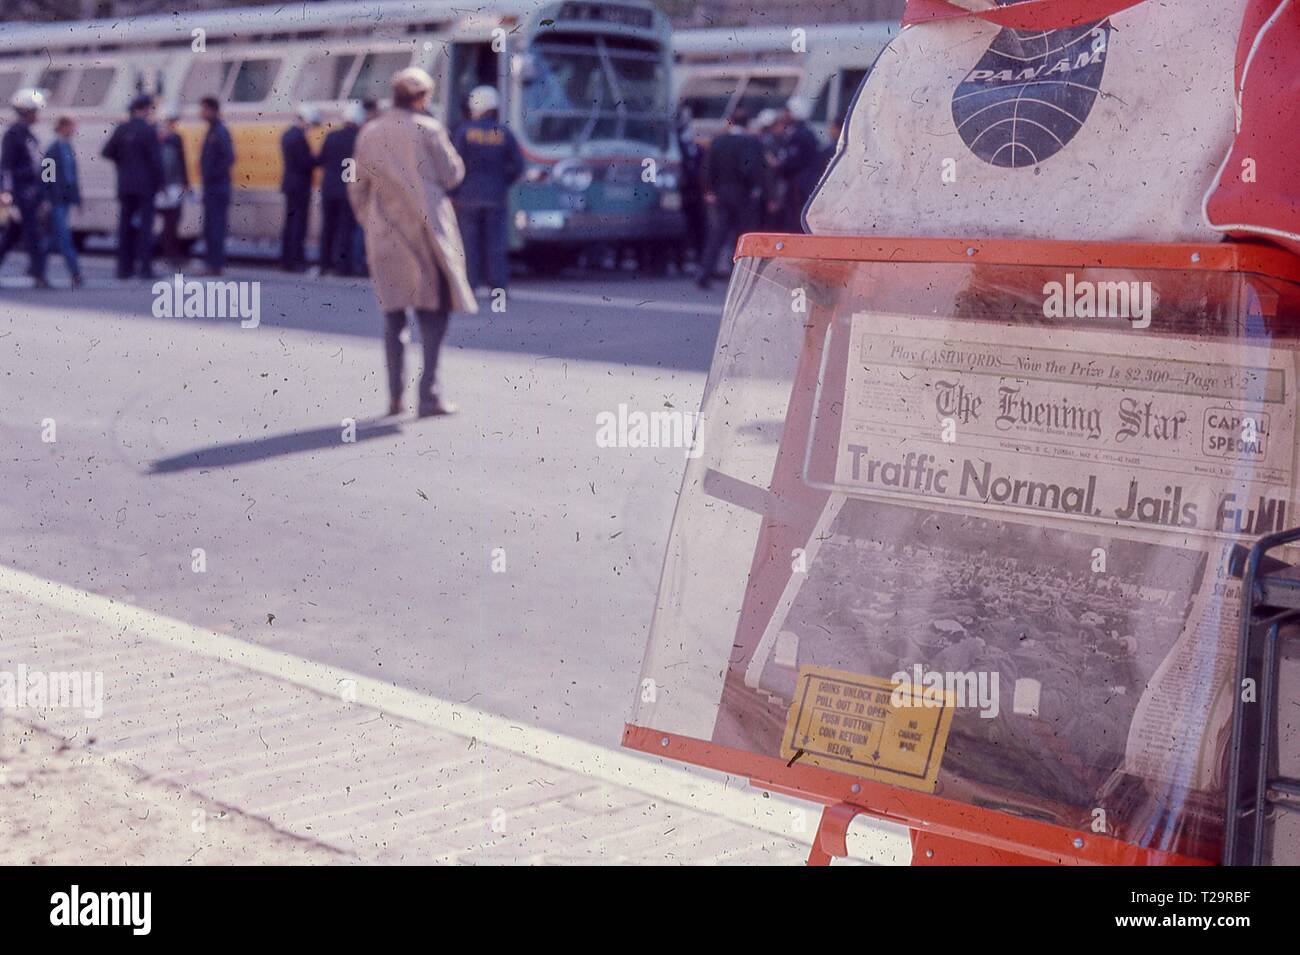 During the May Day protests against the Vietnam War in Washington, DC, a newspaper kiosk for the Evening Star is visible with headline reading Traffic Normal, Jails Full, while police officers load protesters into buses in the background, 1971. () Stock Photo